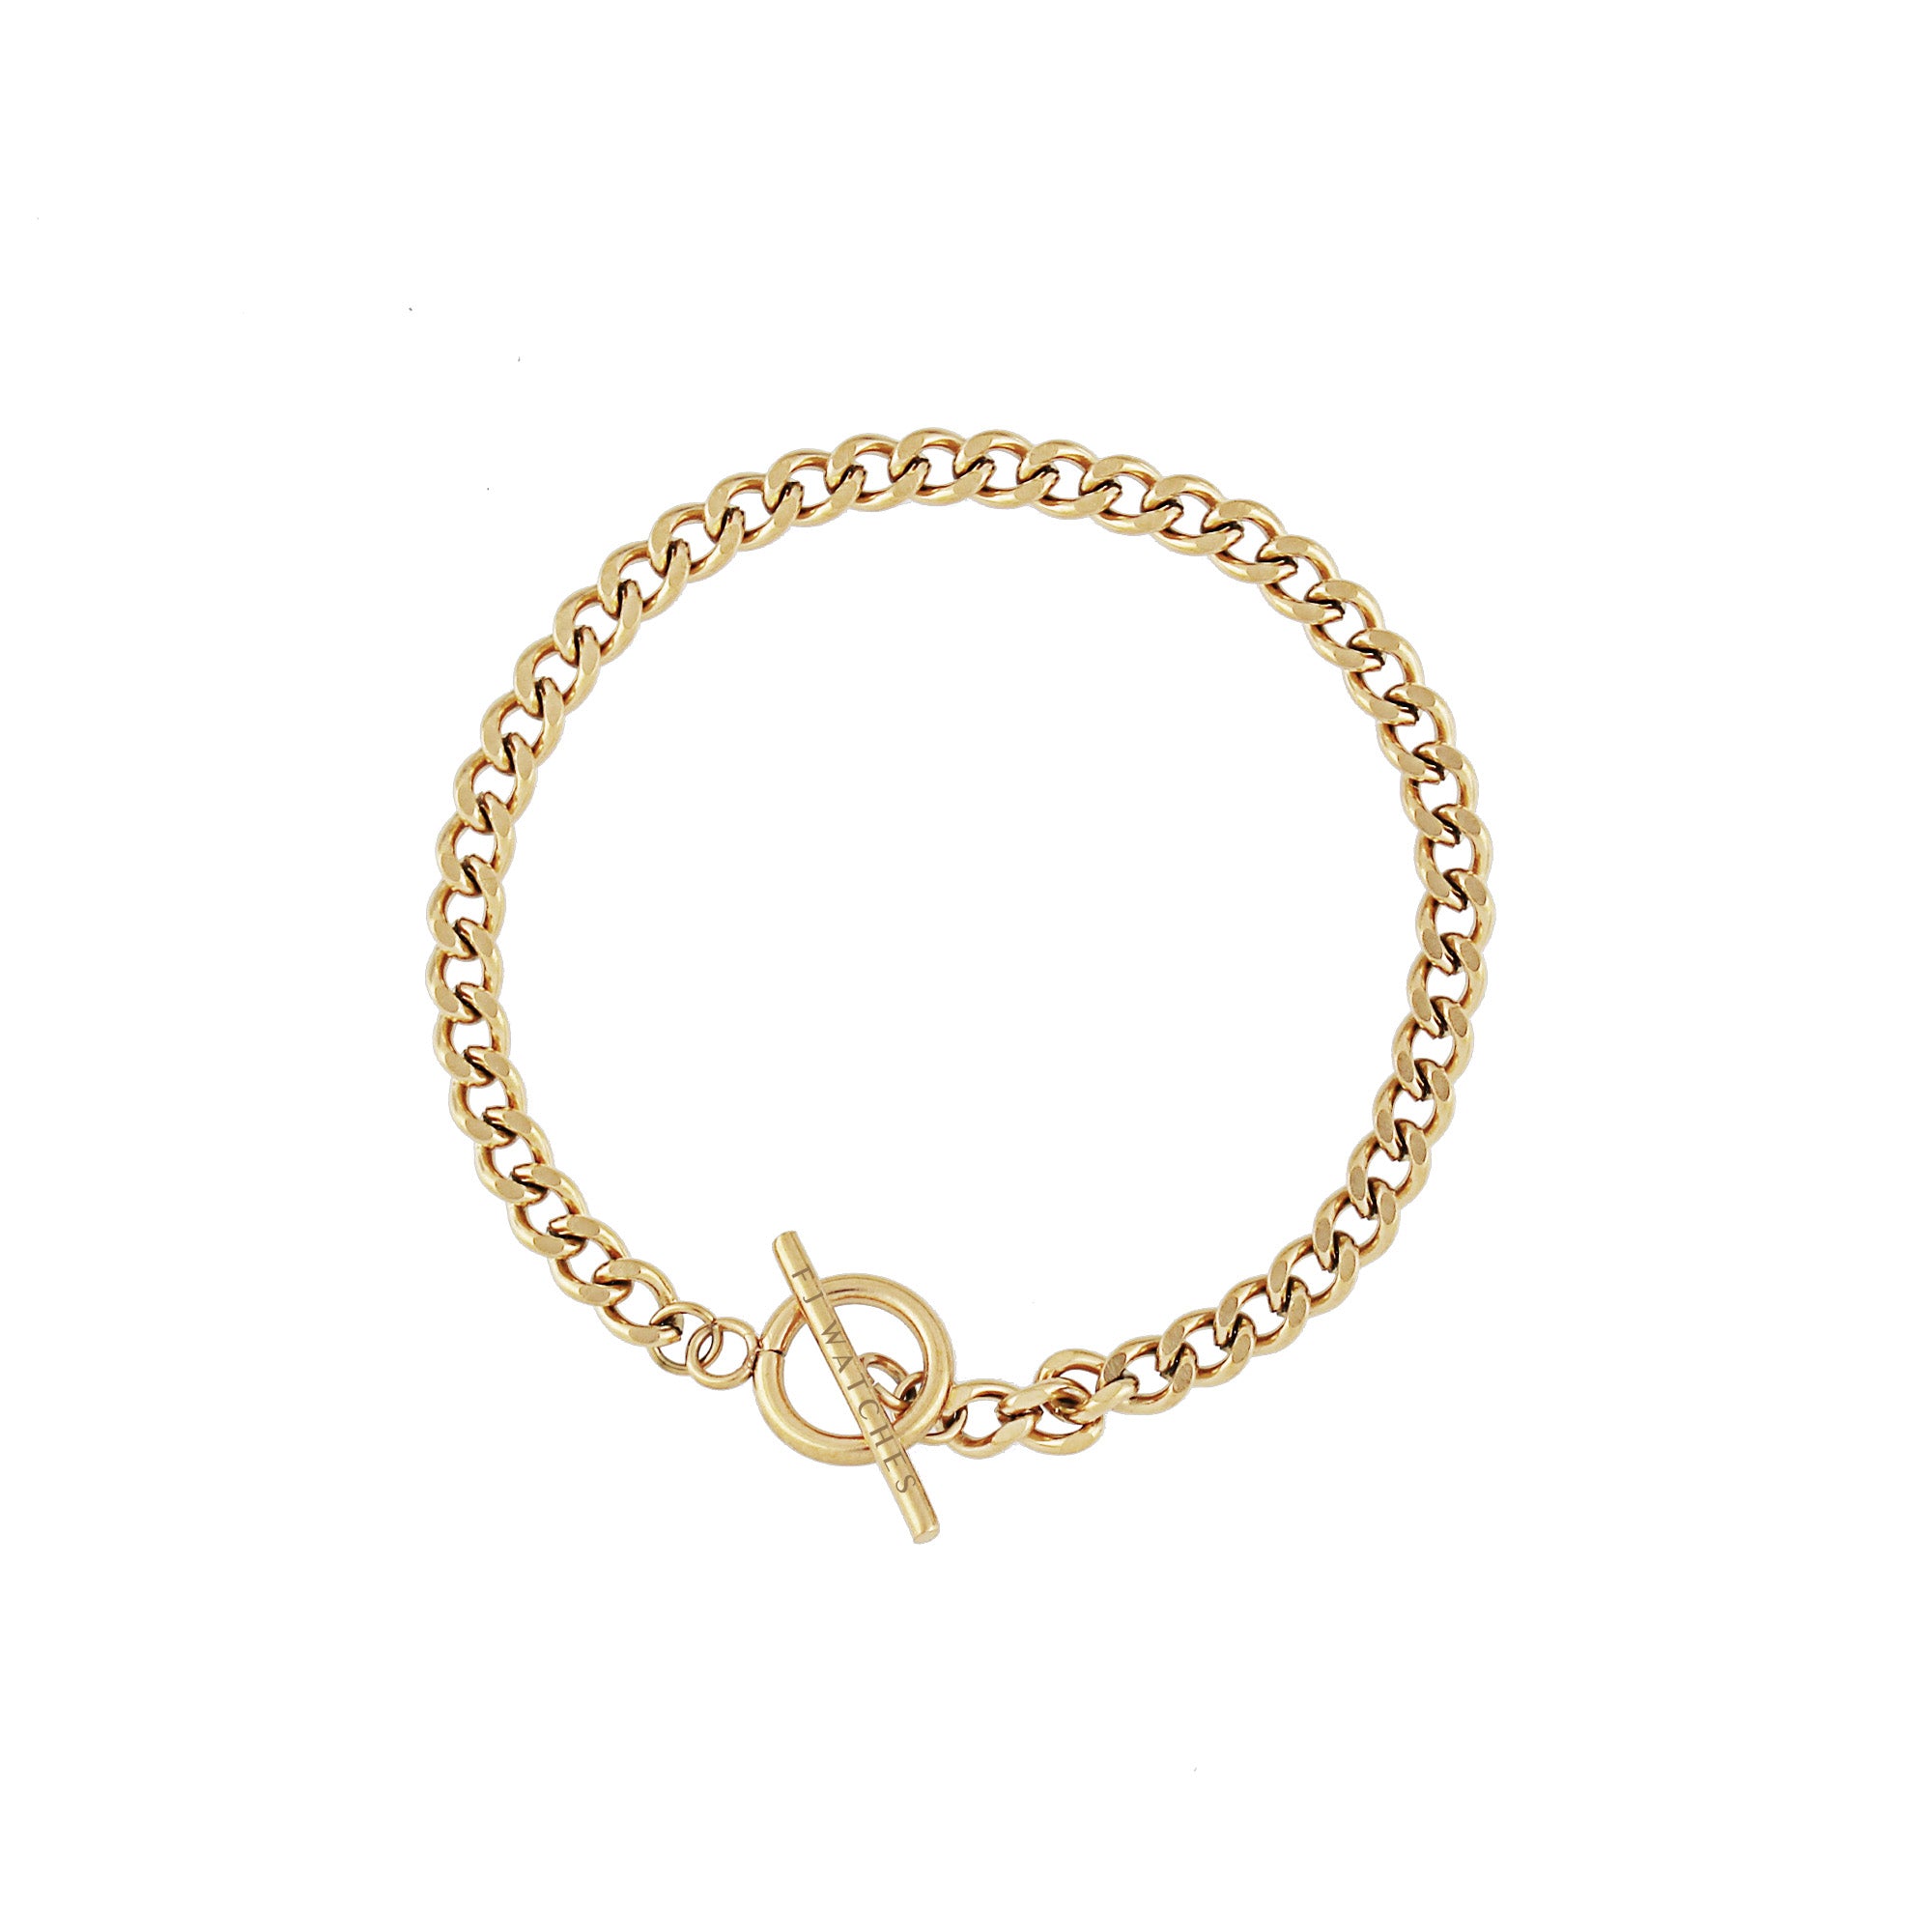 Jucar bracelet from Five Jwlry, designed in Montreal, Canada. Features a Cuban chain link in gold-colored, ultra-resistant 316L stainless steel with a distinctive circular toggle clasp closure.